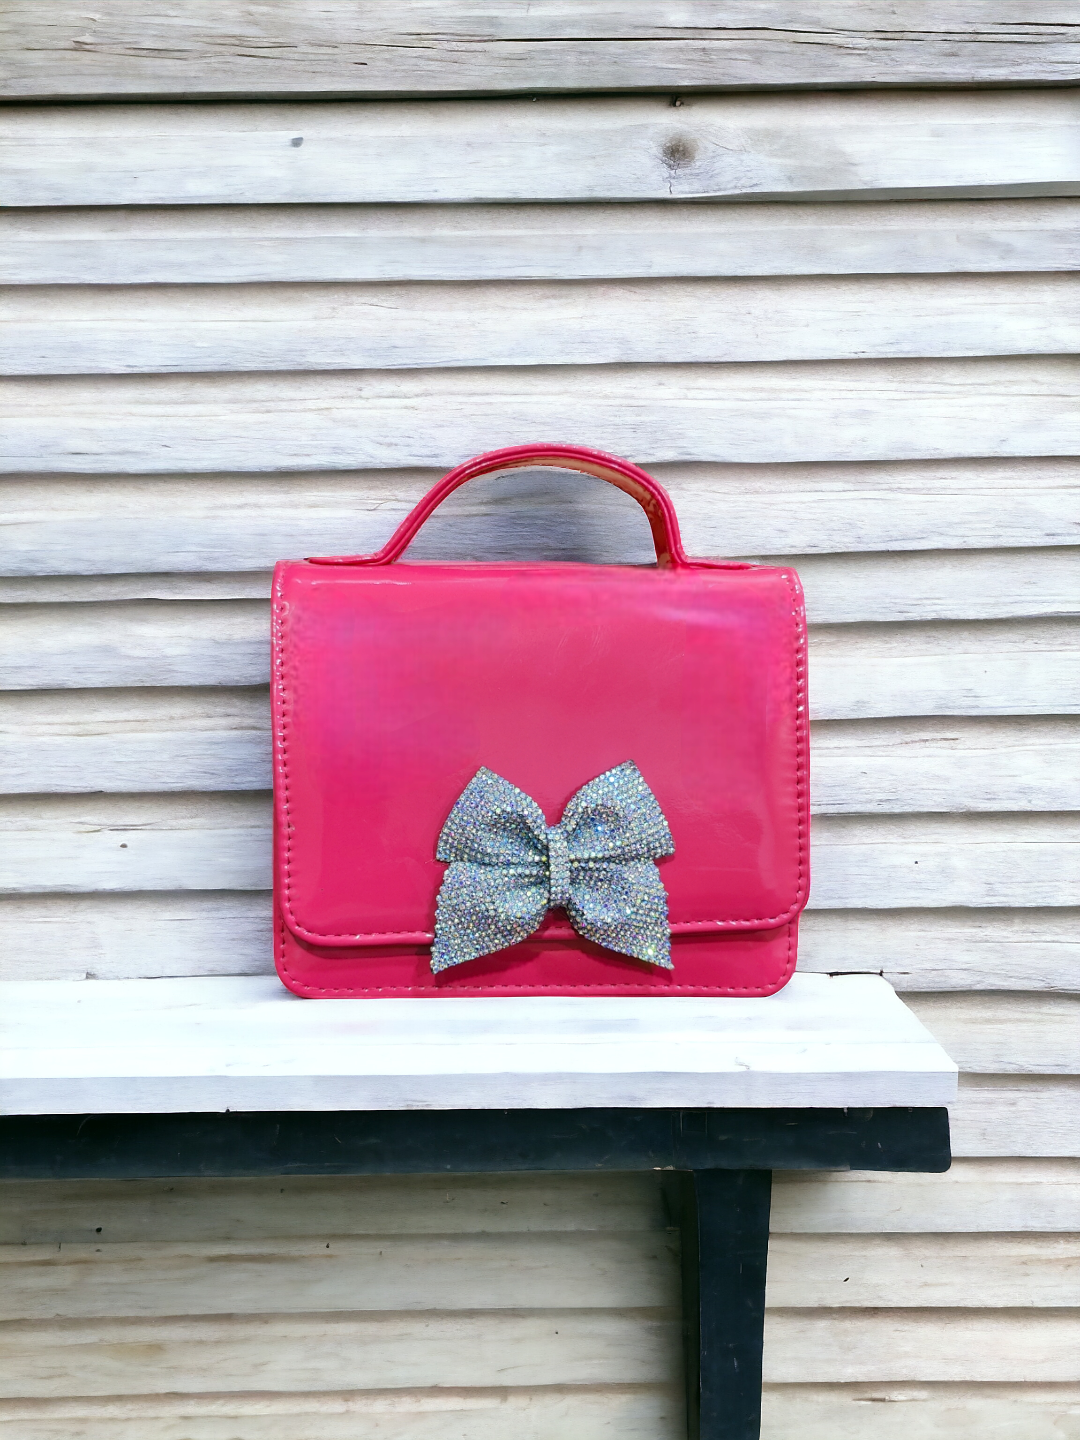 A Vdesi pink handbag with a bow on it. 